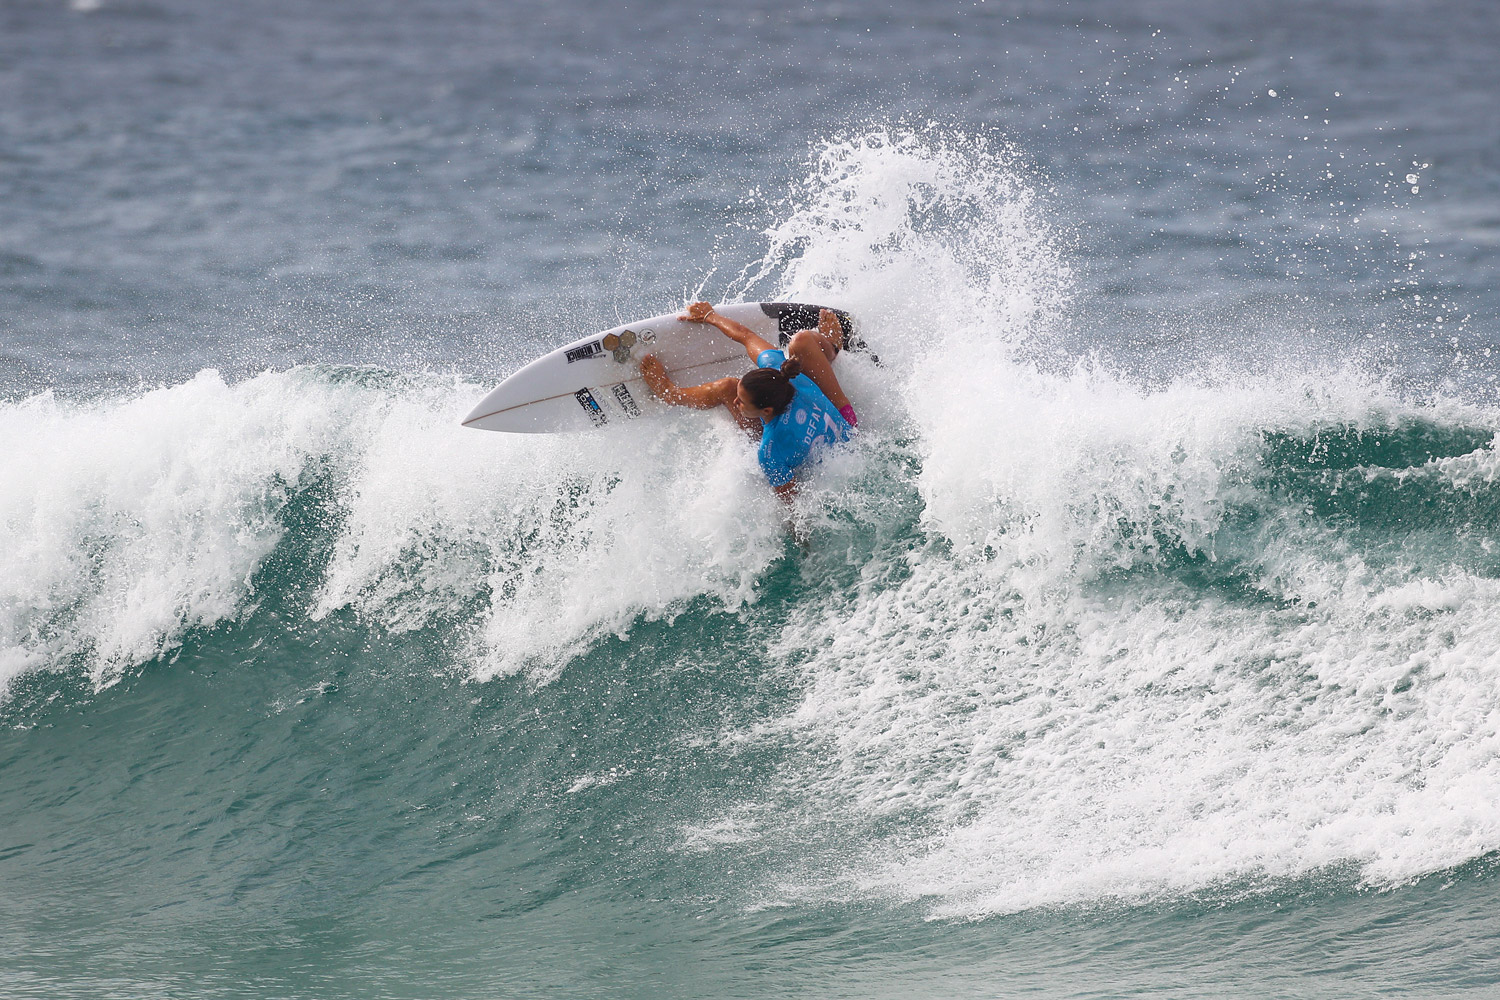 Quarterfinals kick off on Day 5 of the #ROXYpro